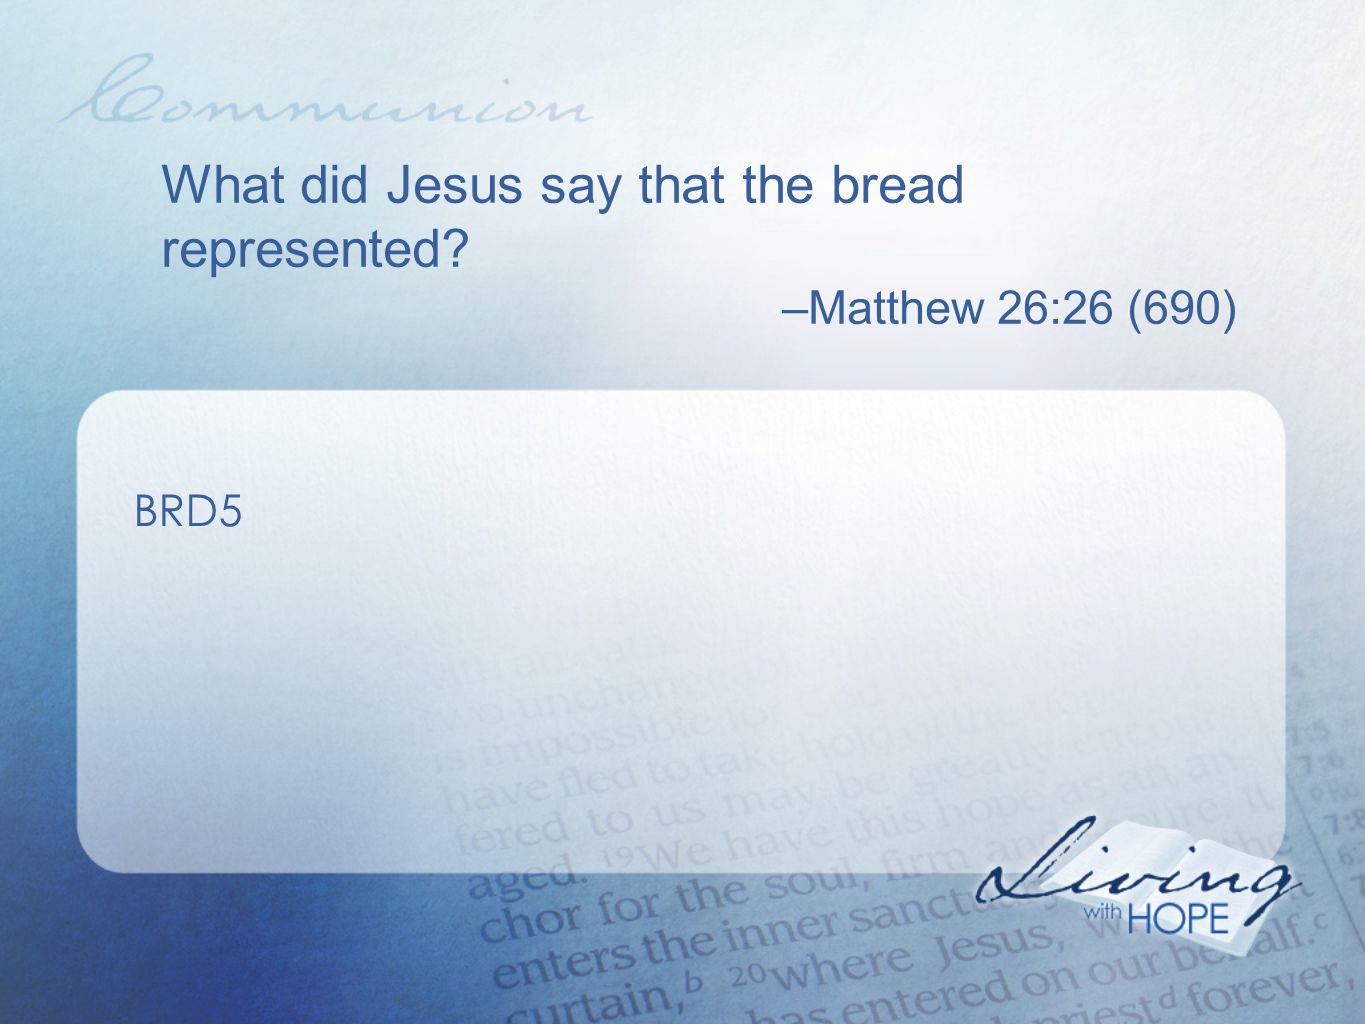 What did Jesus say that the bread represented